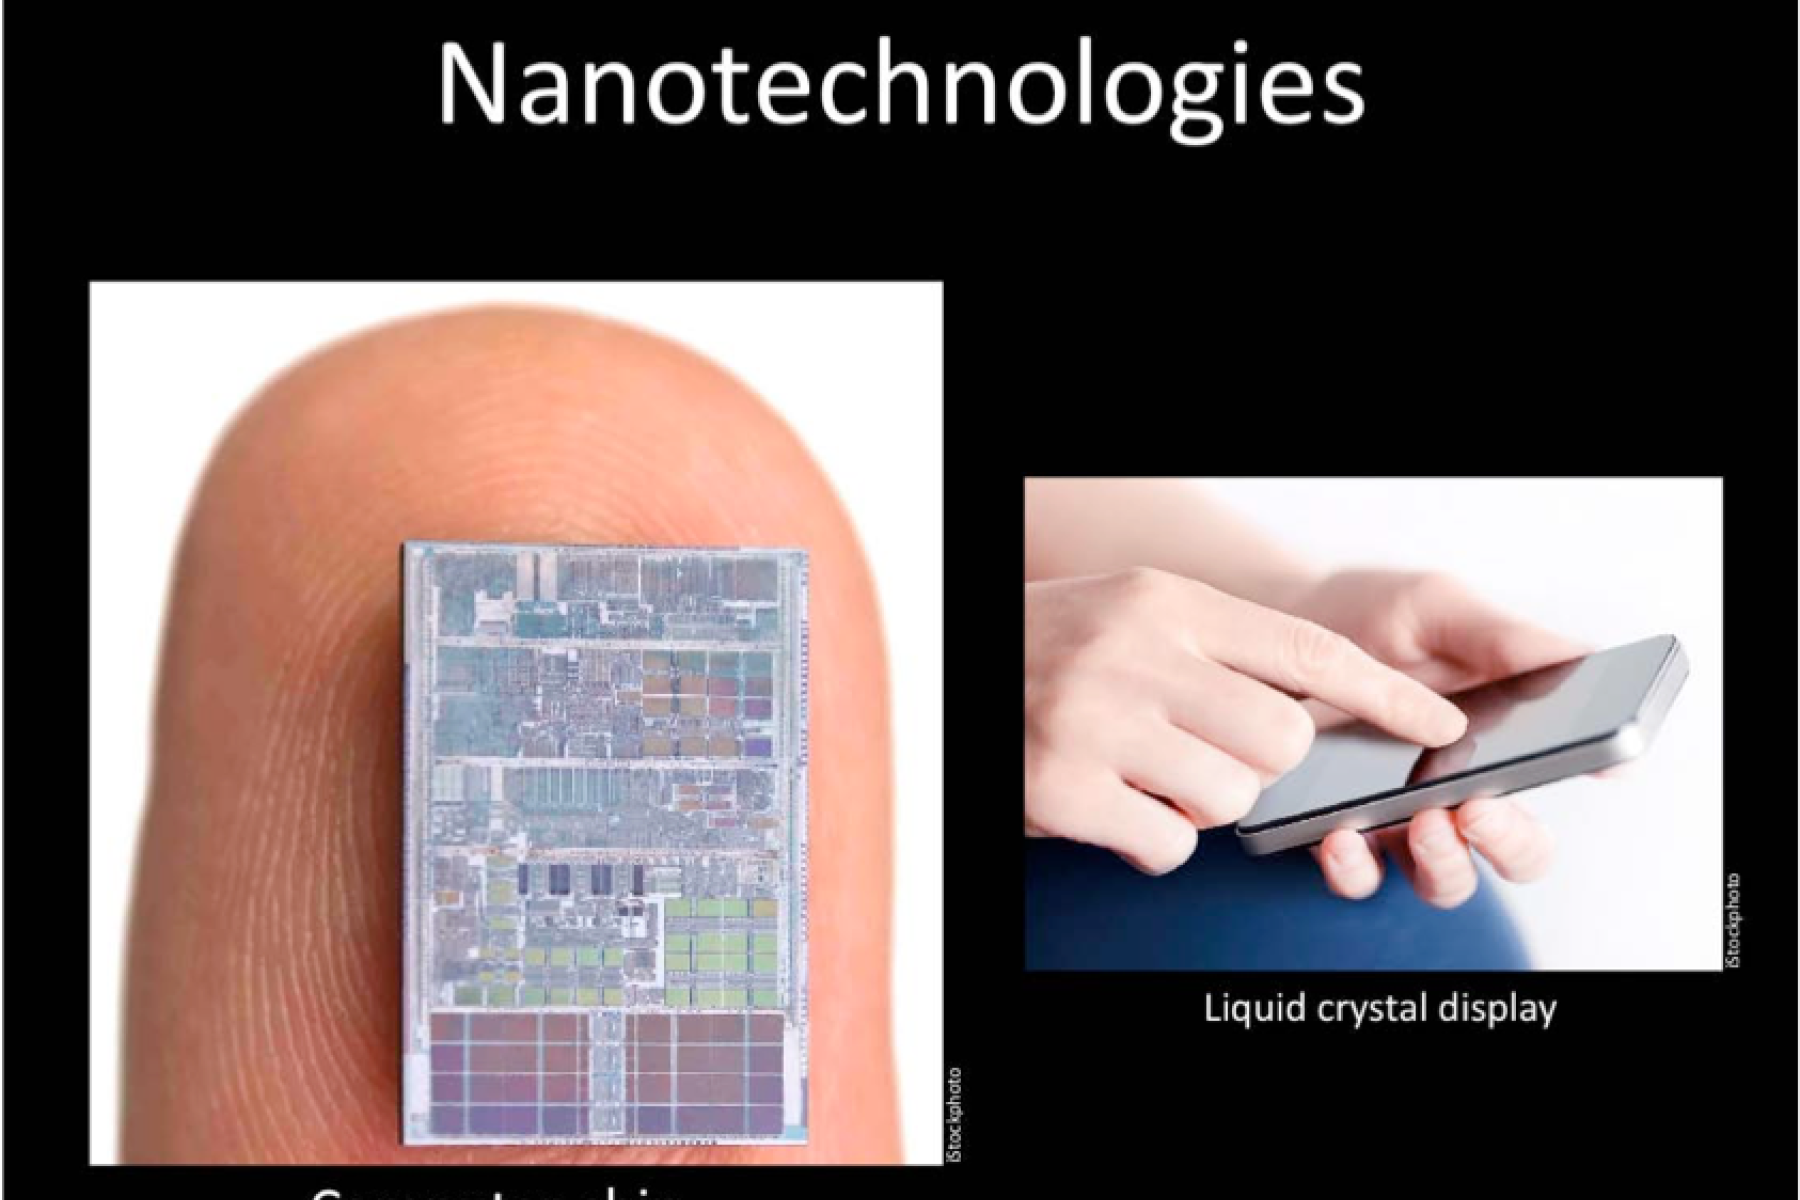 Nano 101 slide presentation showing tiny electronics compared to a finger